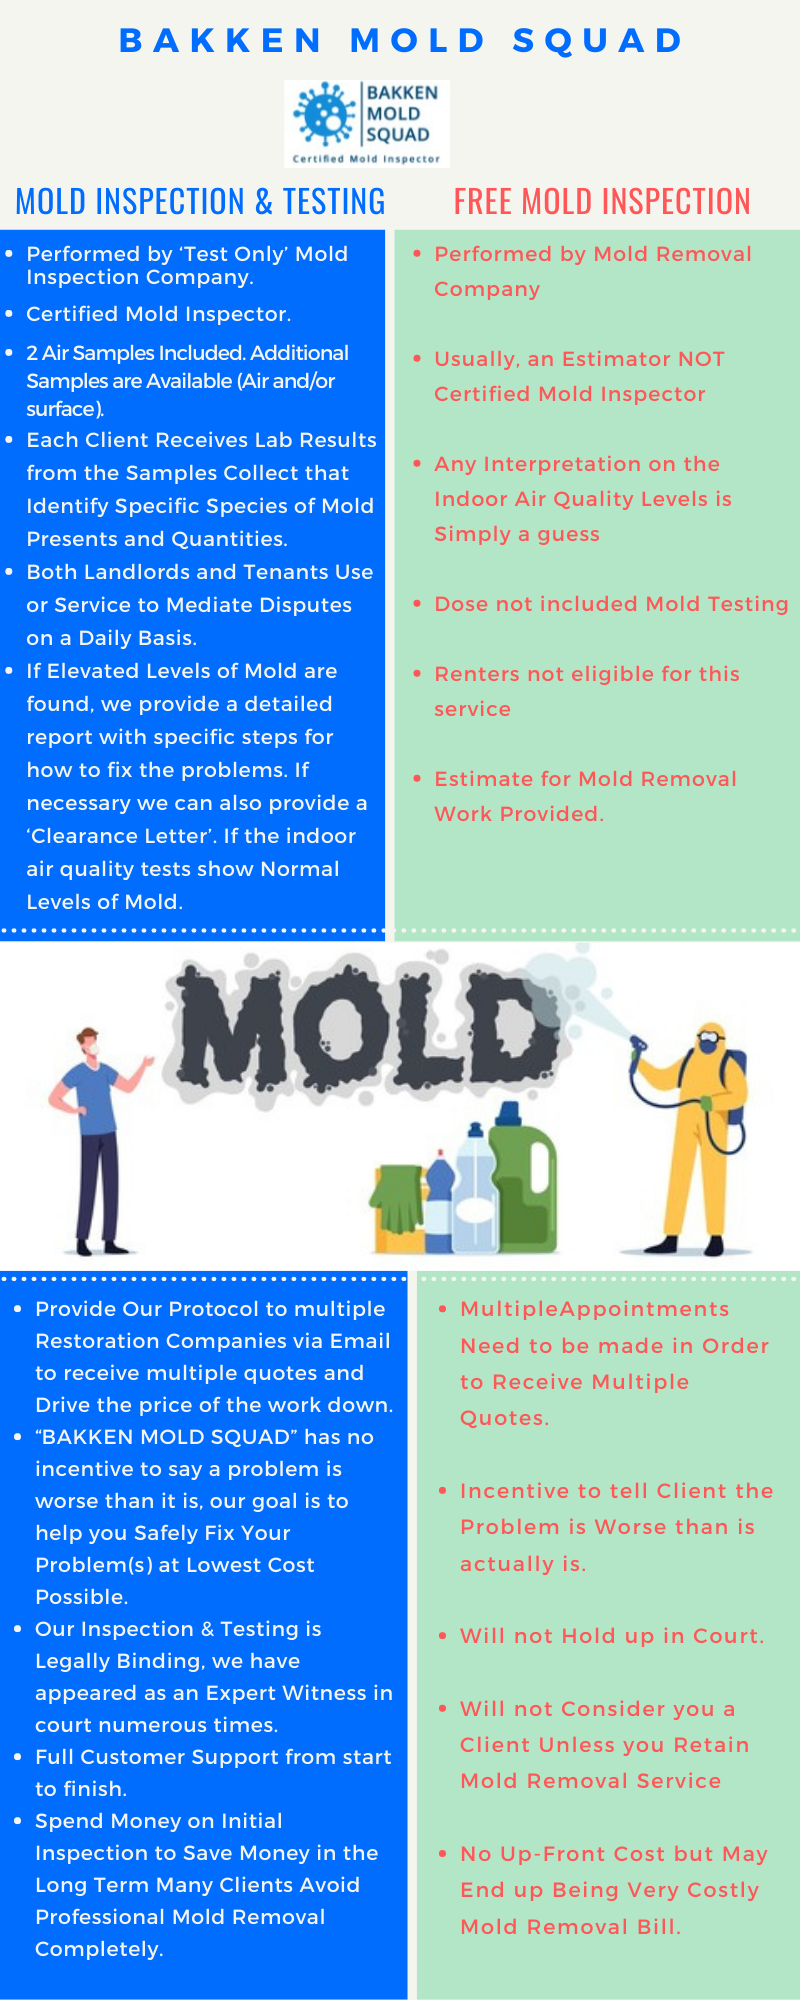 Free Mold Inspection – Is It Worth It?